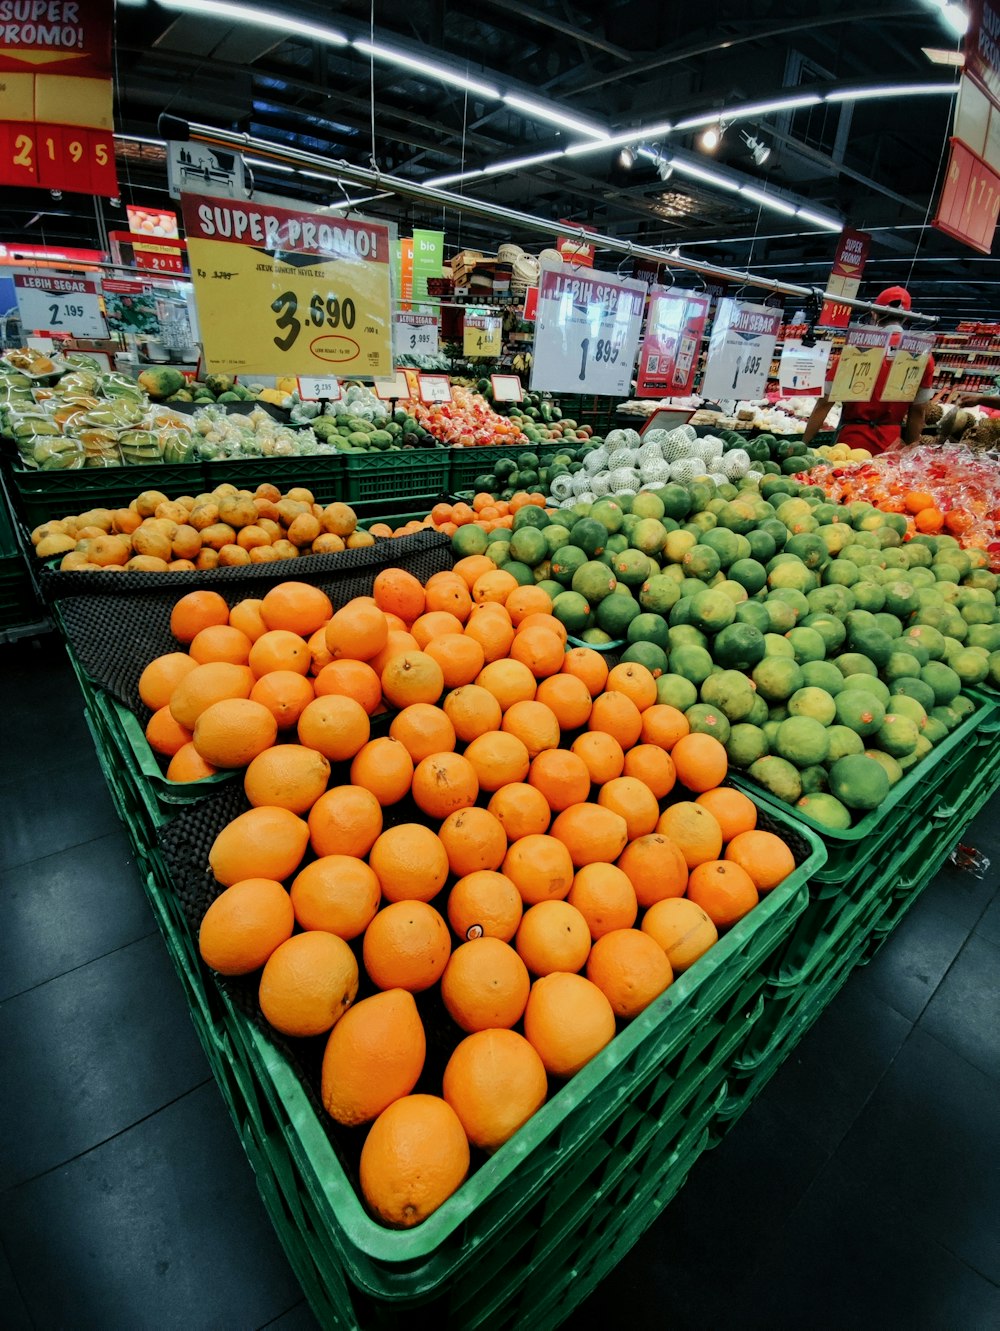 a produce section of a grocery store filled with oranges and melons